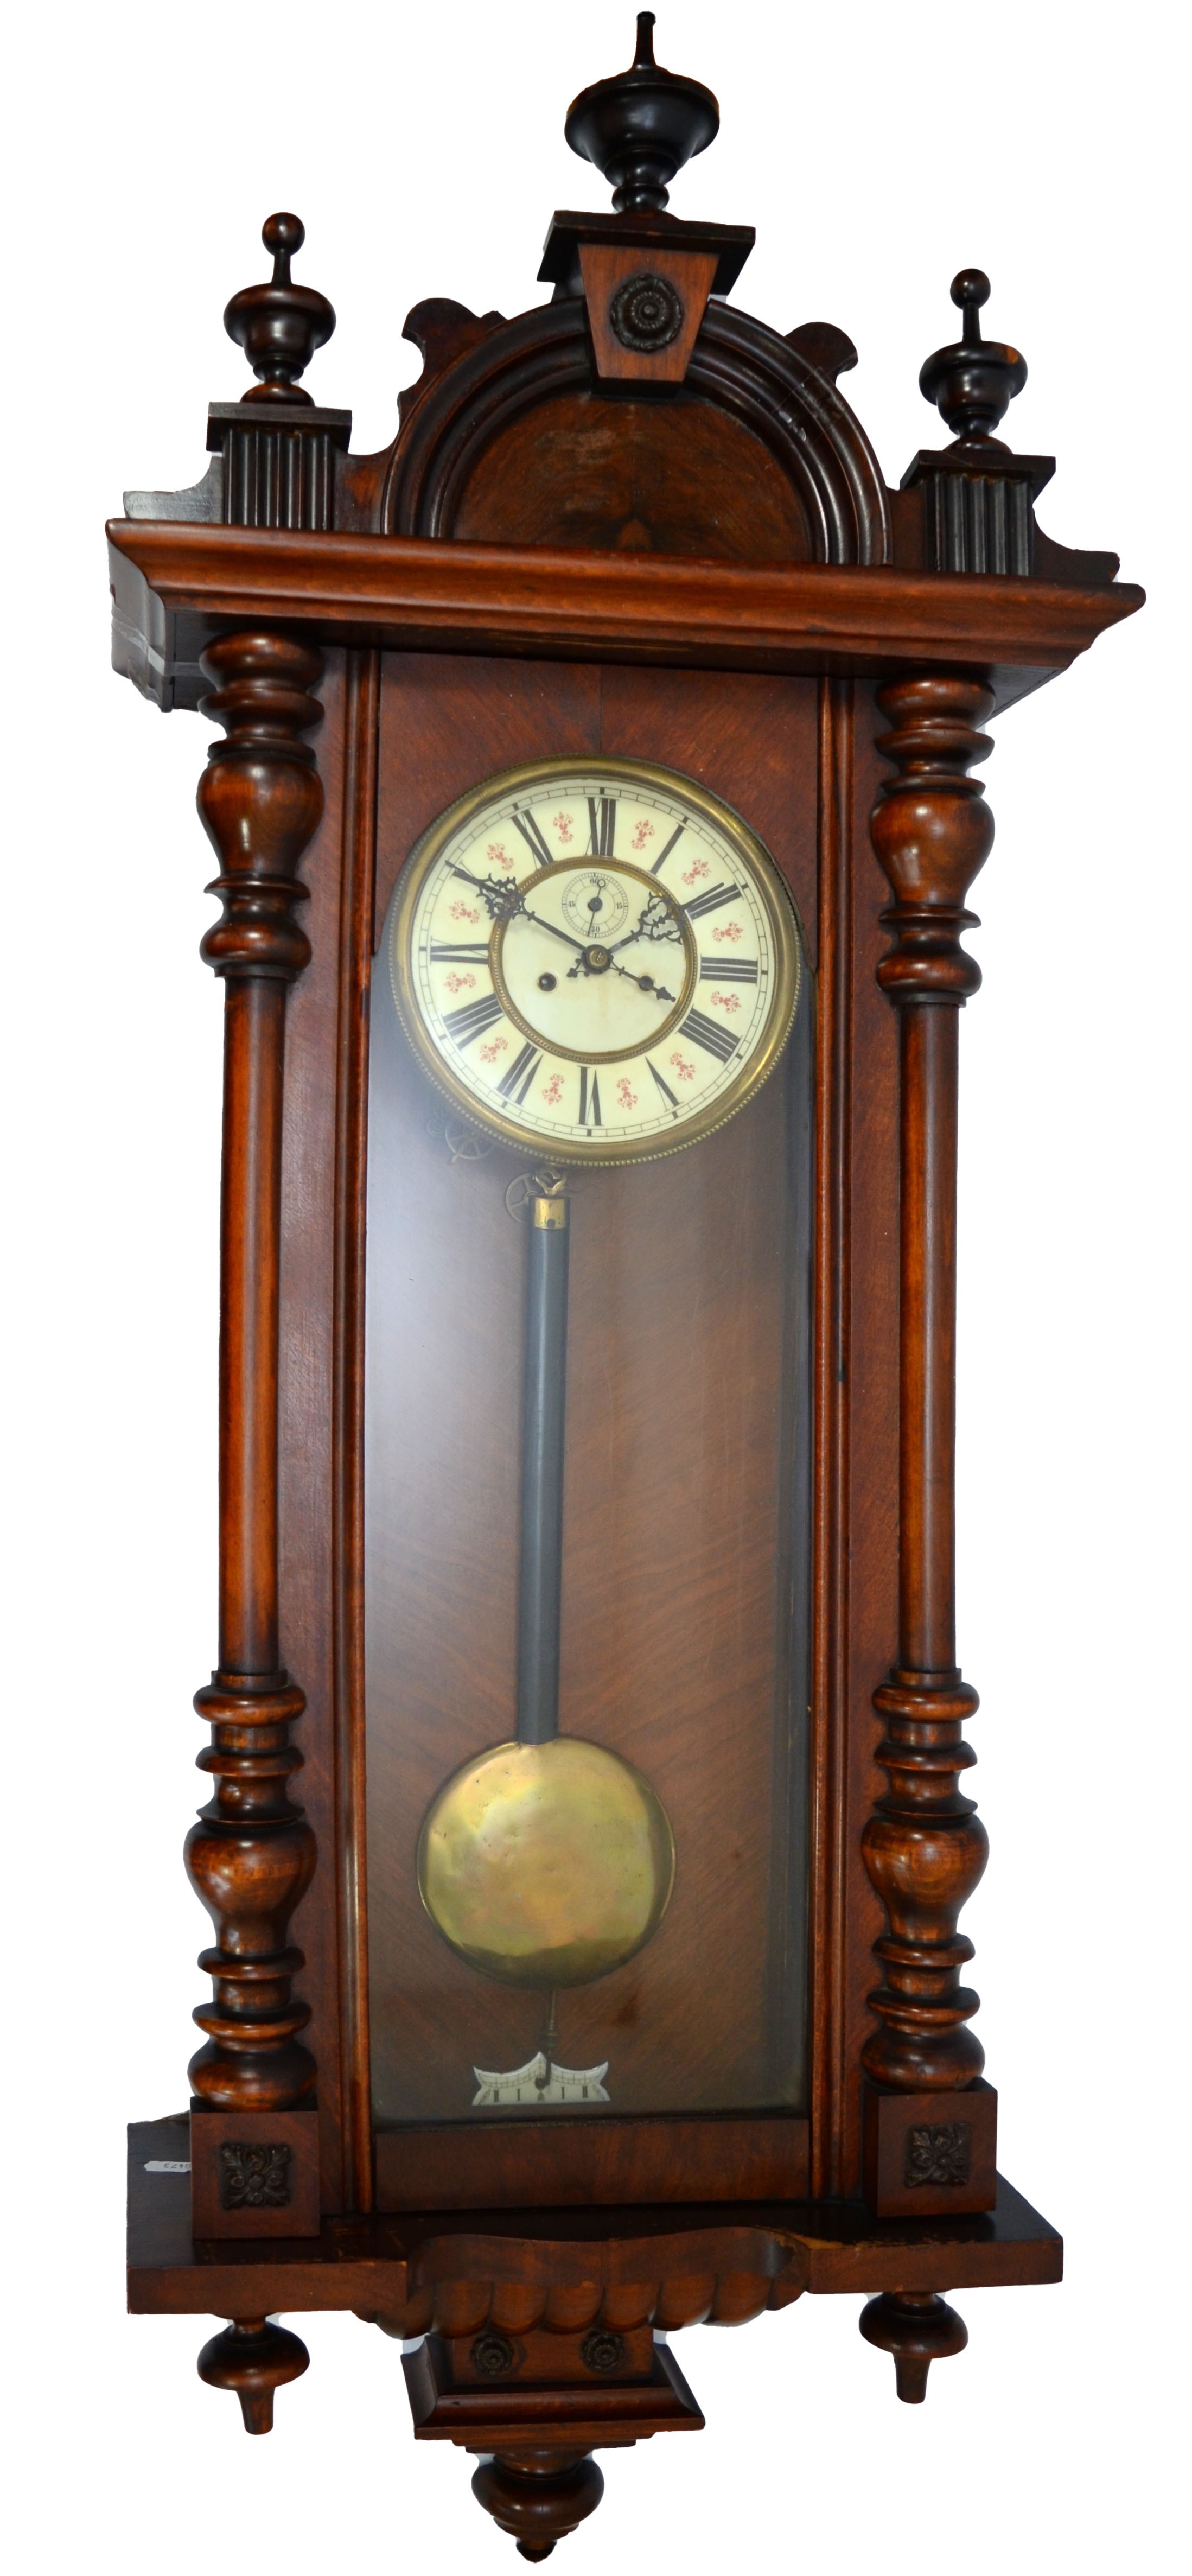 A late 19th century mahogany cased Vienna style wall clock, with arched pediment and turned